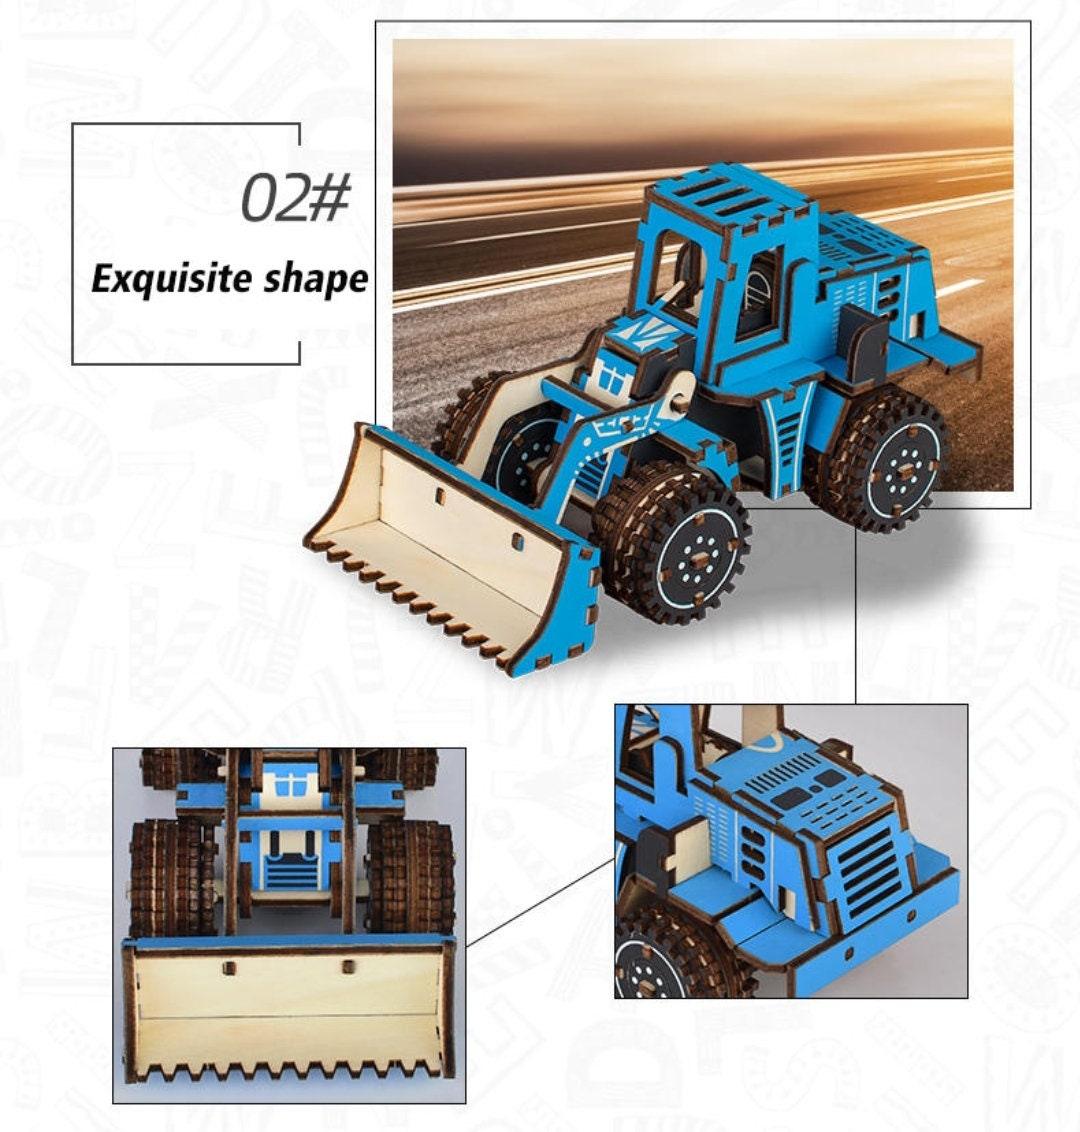 DIY Wooden Mechanical Puzzles - Engineering Vehicles Puzzle Toys - 4 Types of construction vehicles Wooden Puzzles Educational Toy - Rajbharti Crafts